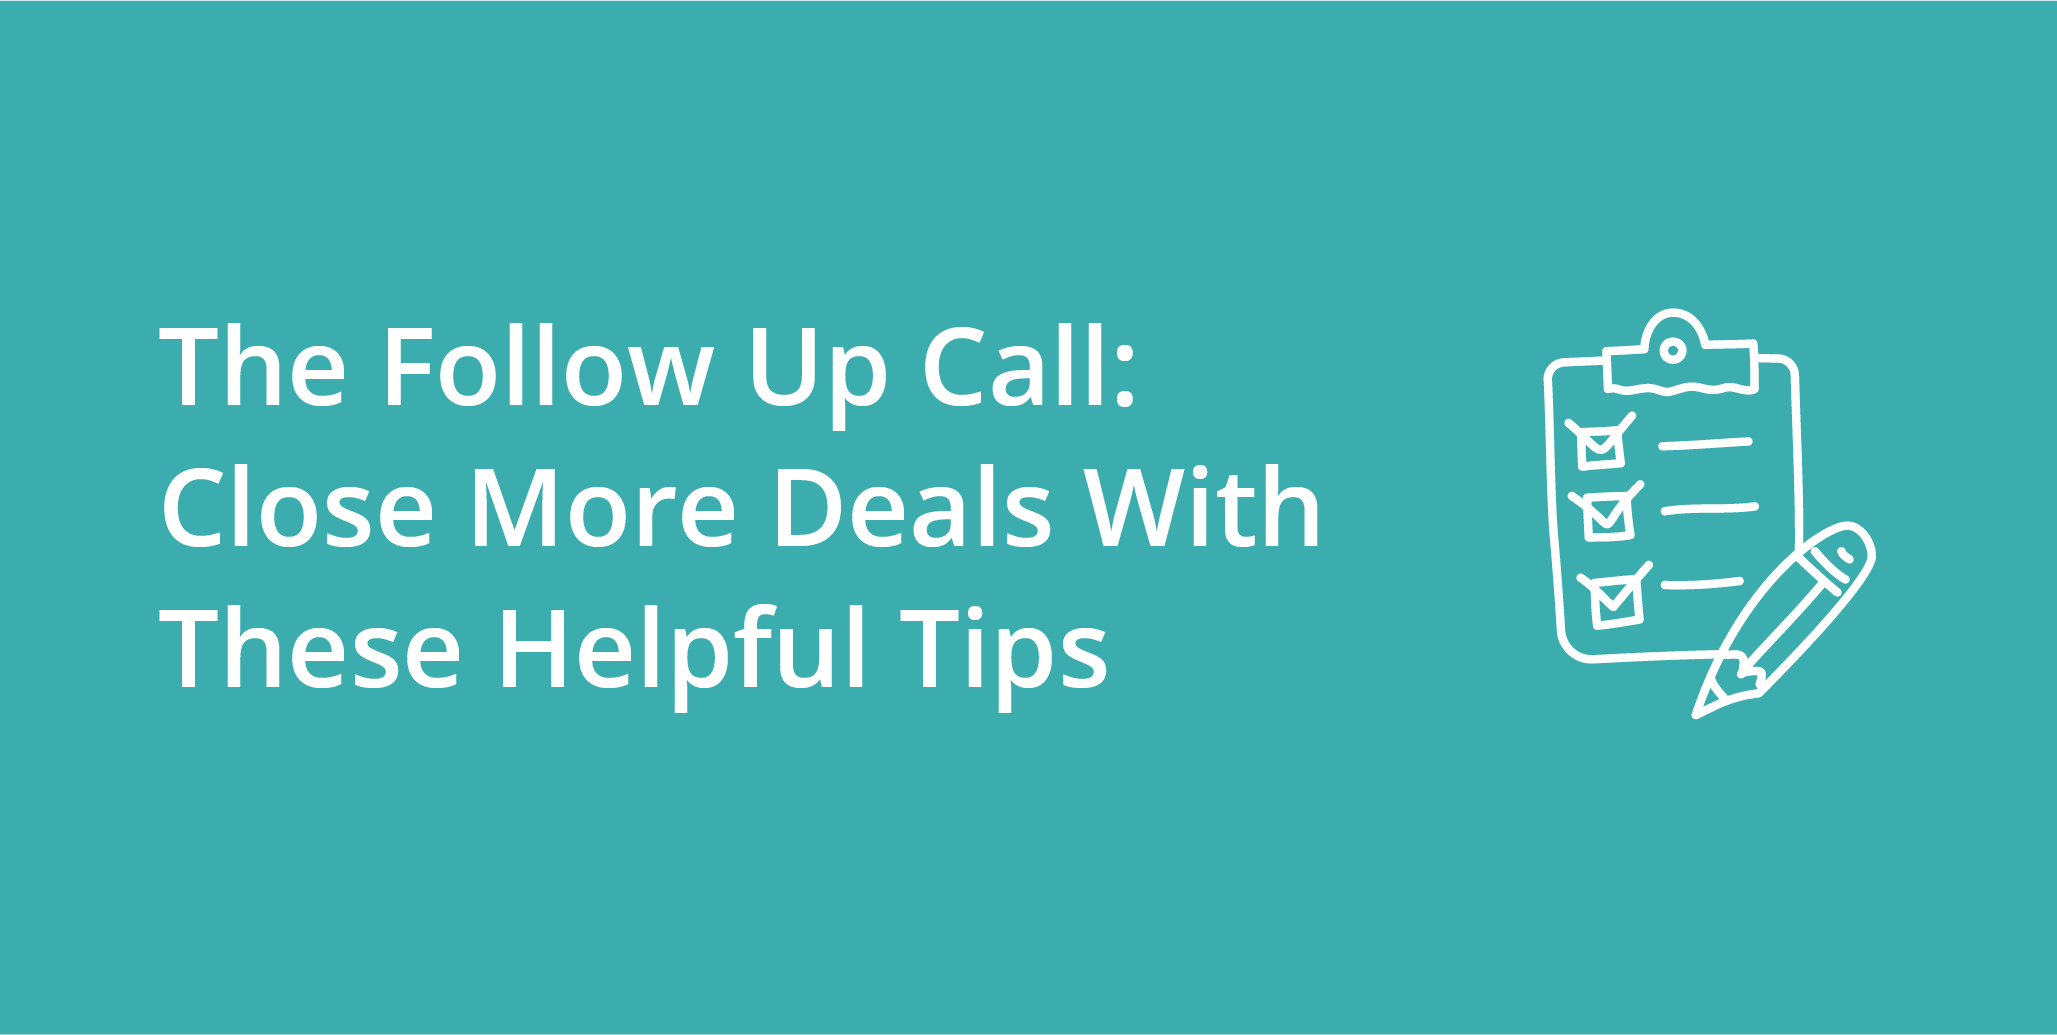 The Follow Up Call: Close More Deals With These Helpful Tips | Telephones for business